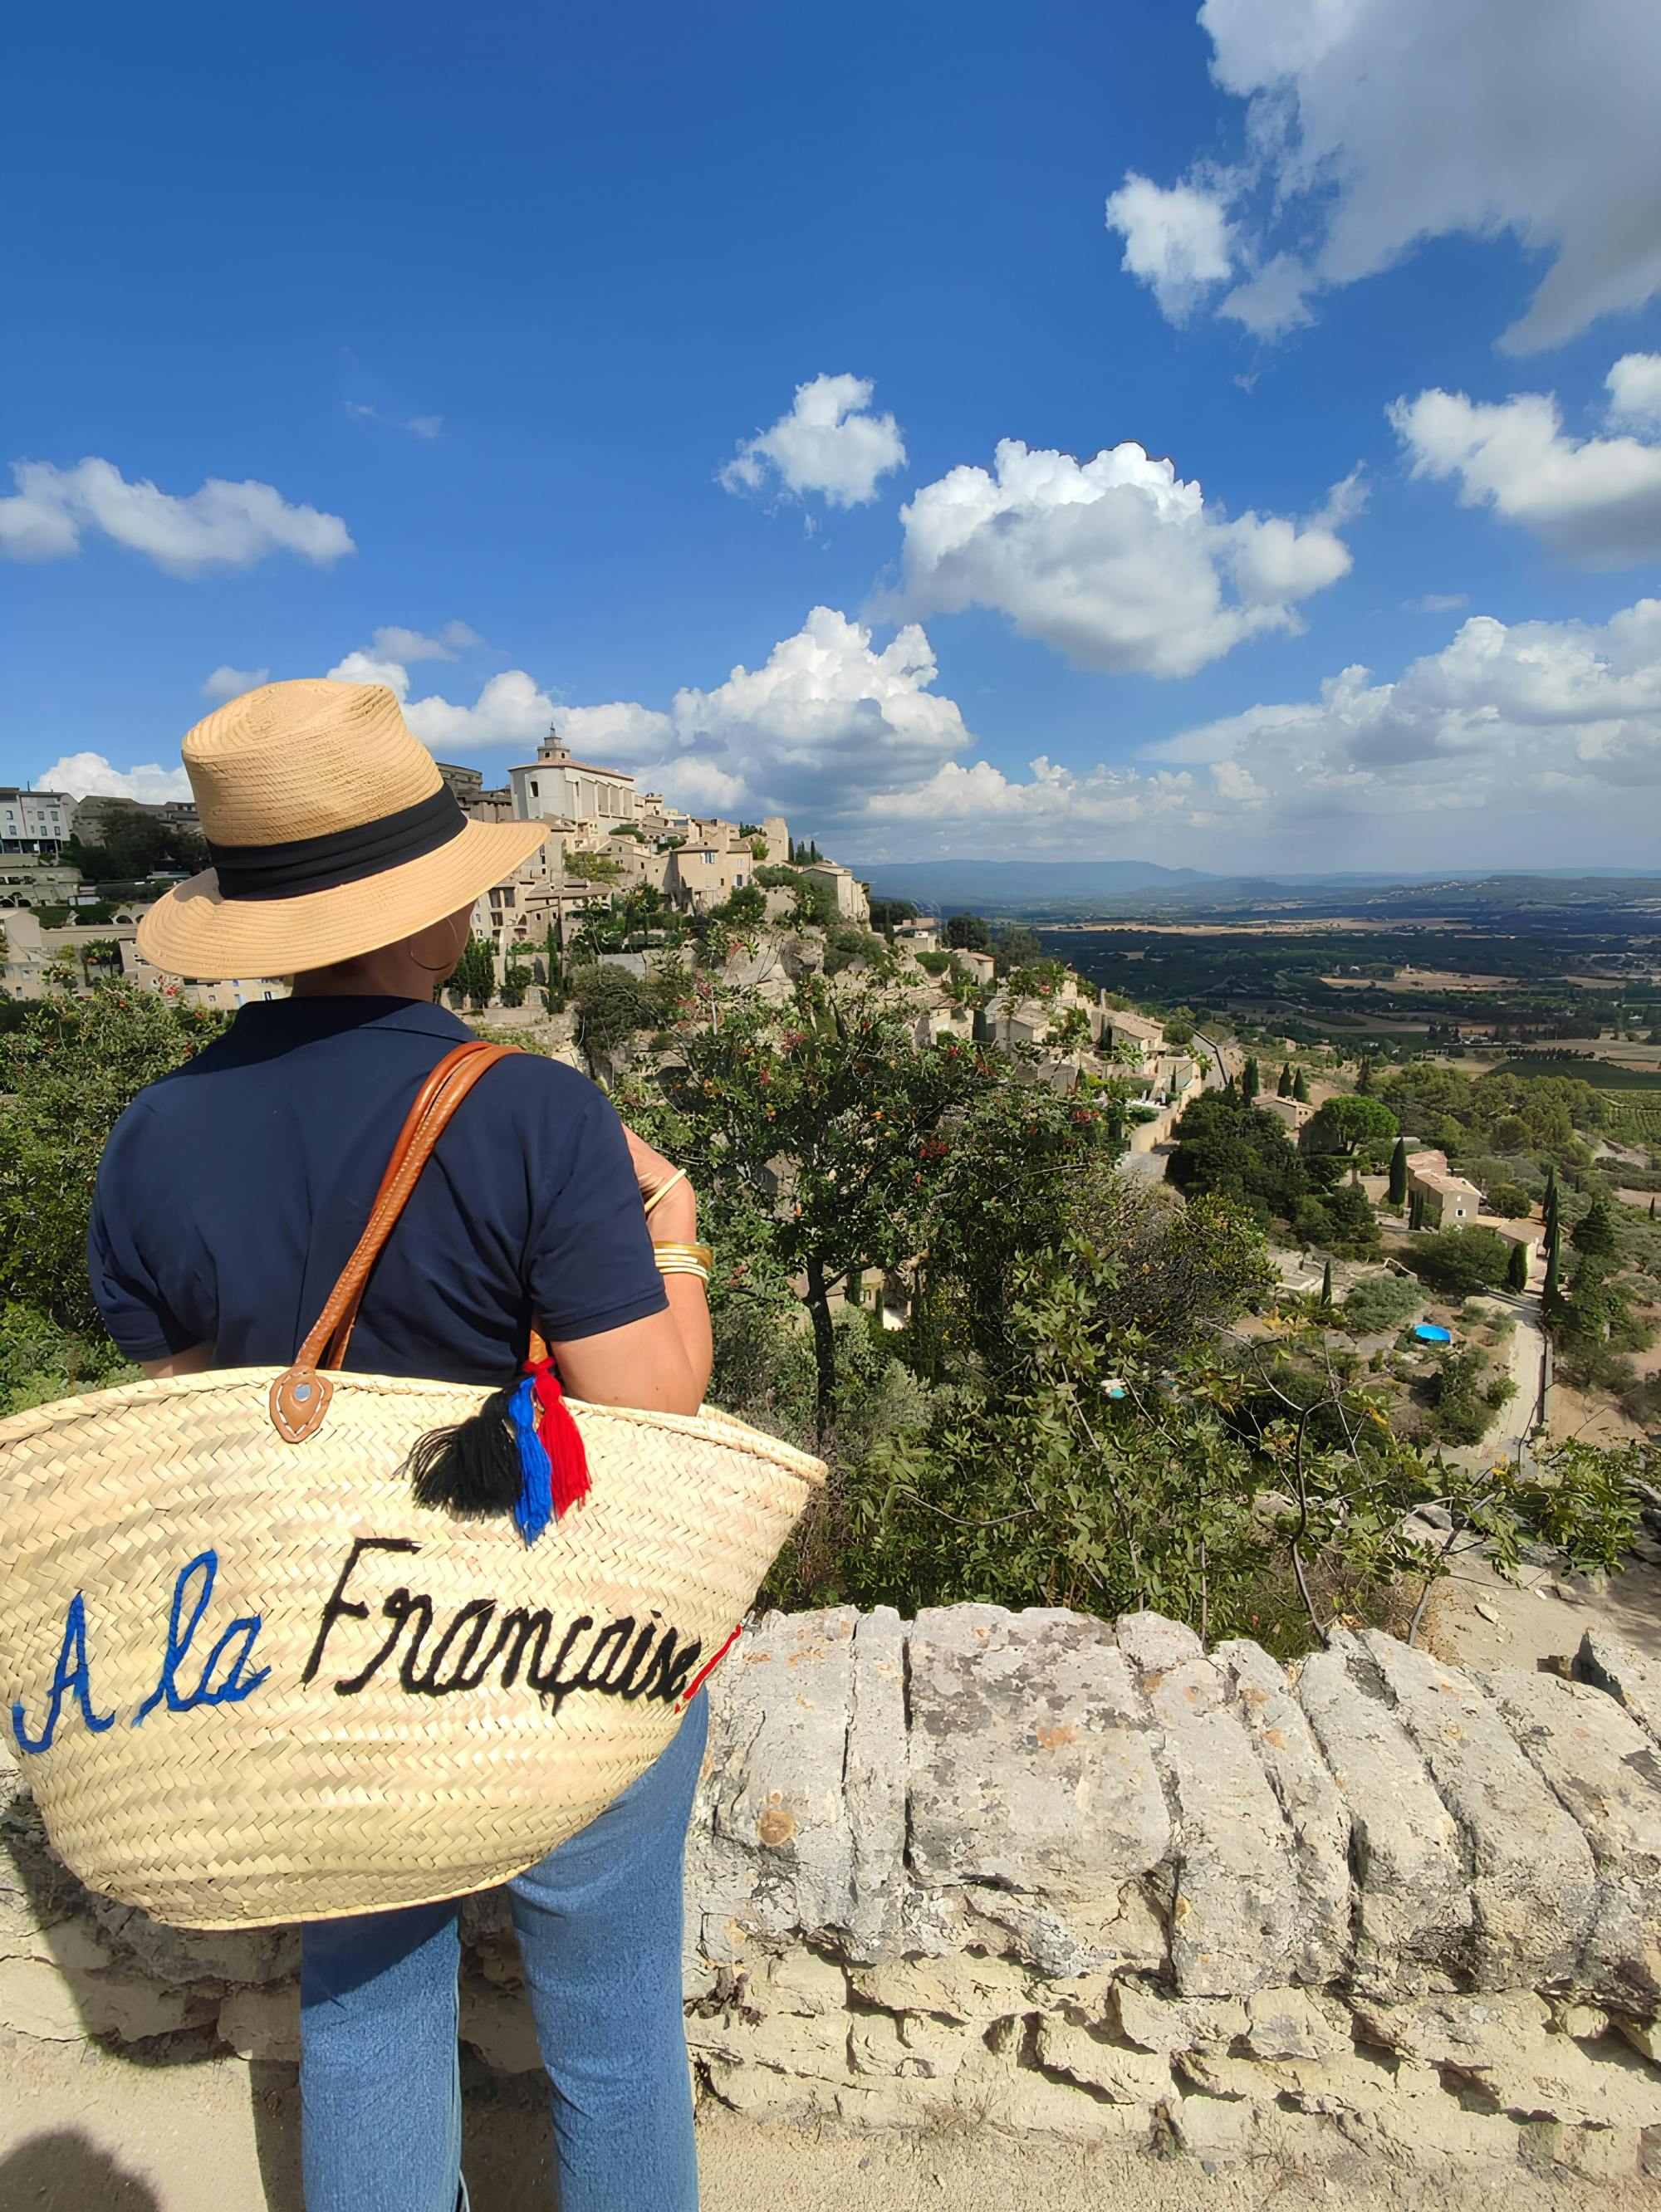 Full-day tour of Provençal Markets and Villages in Luberon